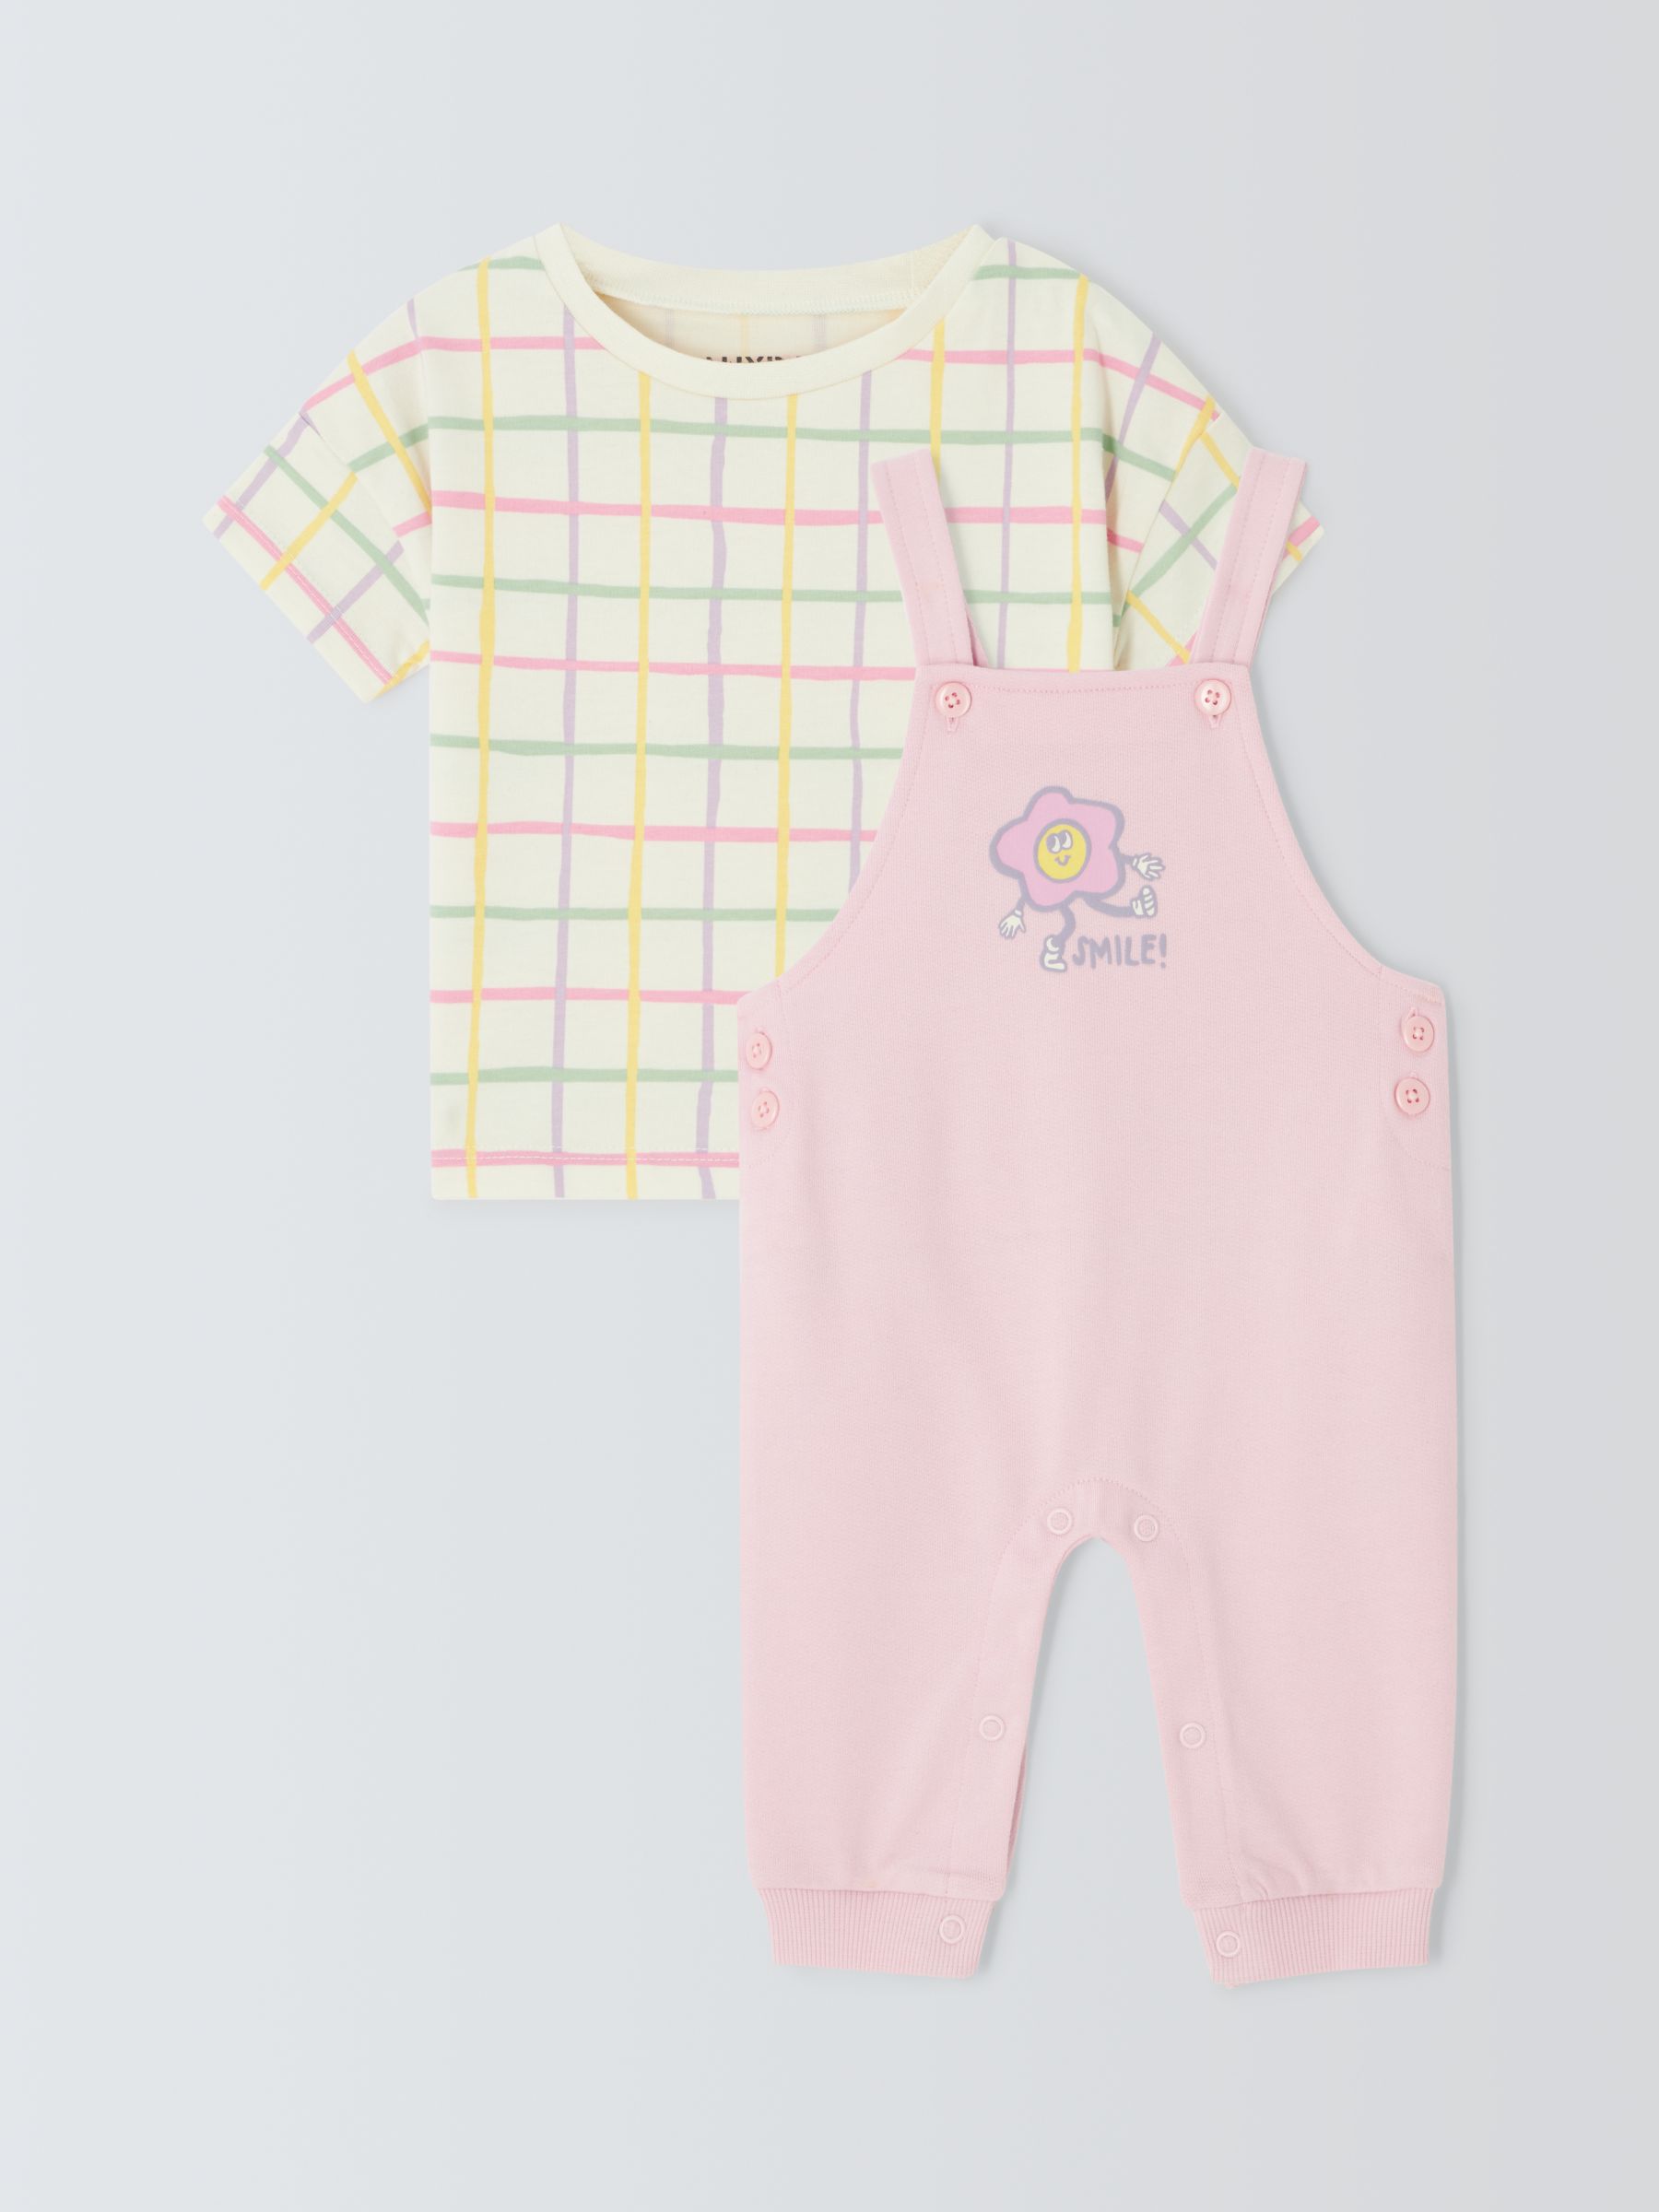 John Lewis ANYDAY Baby Smile Dungarees and T-Shirt Set, Pink/Multi, 3-6 months